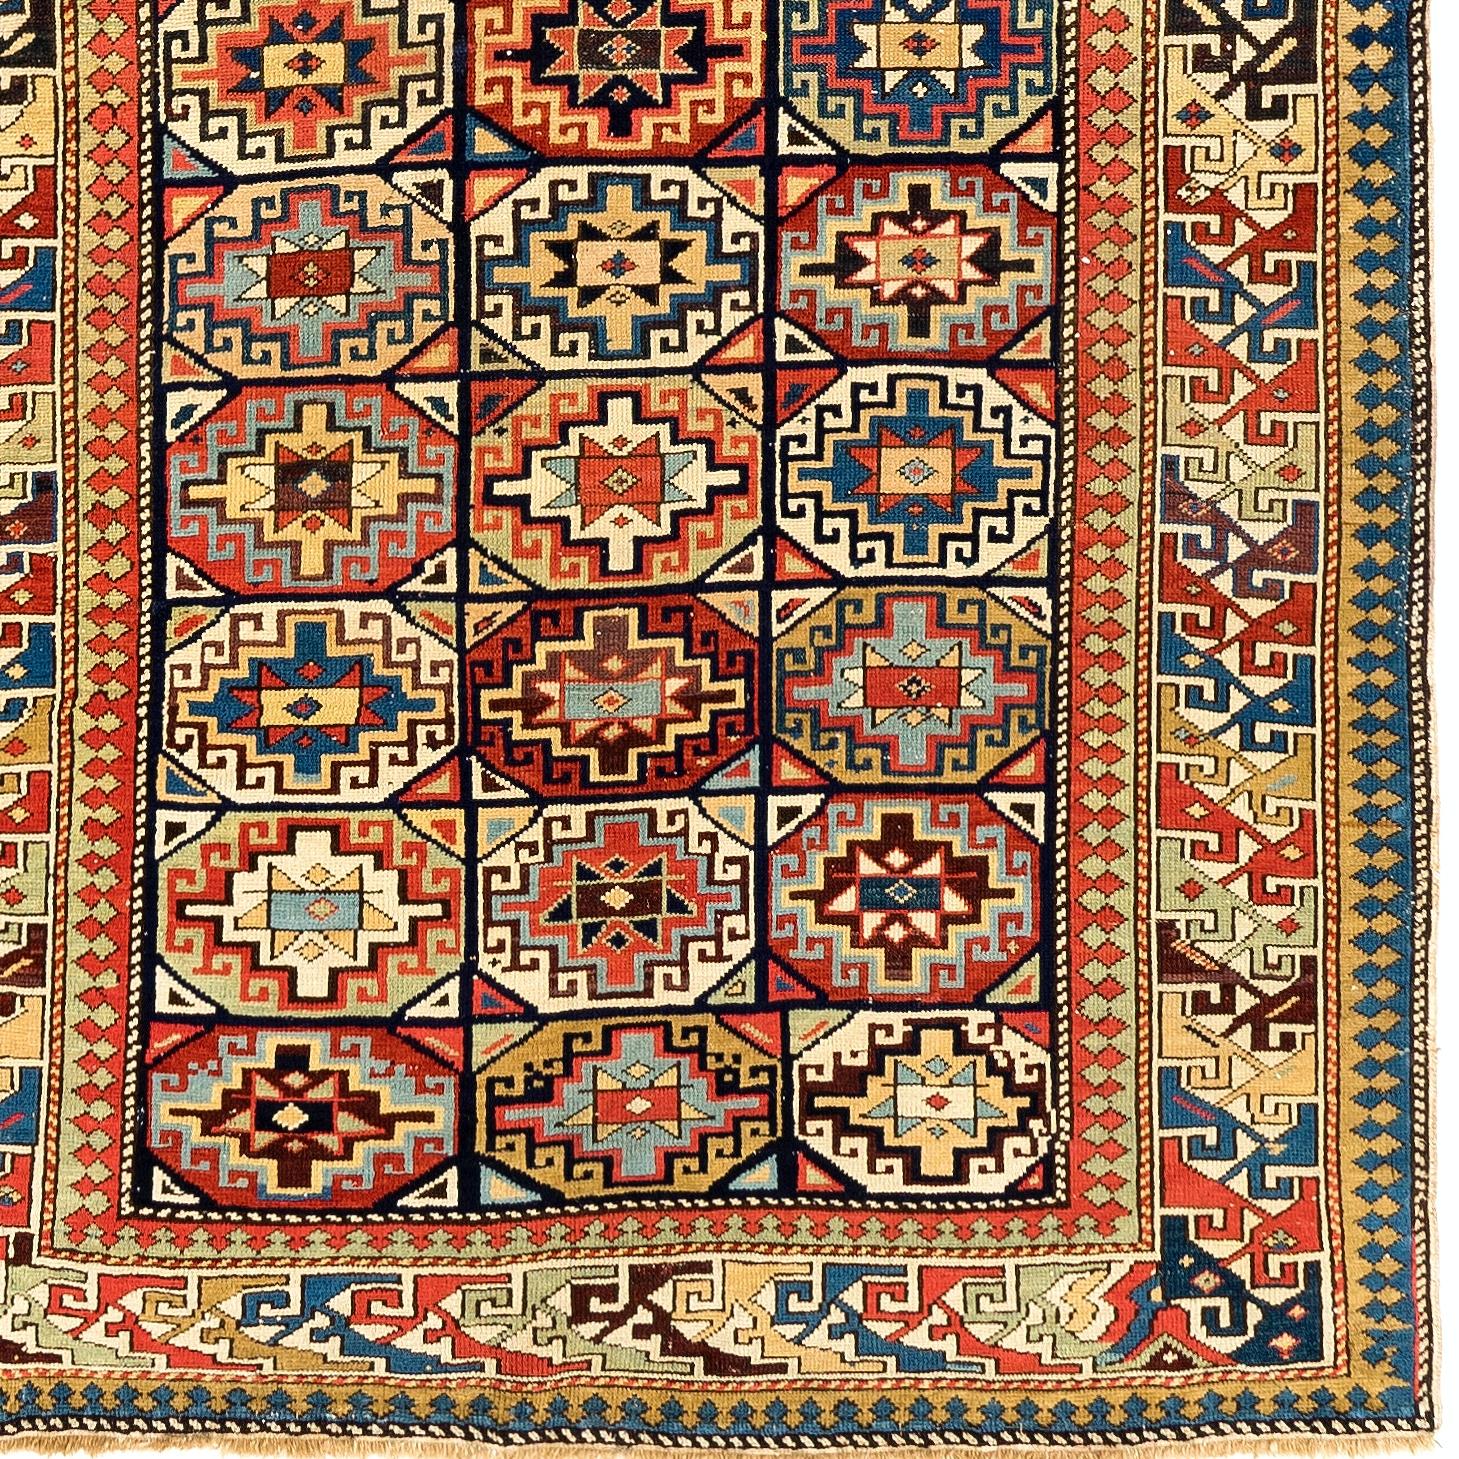 Antique Caucasian Shirvan Rug, ca 1870. Original good condition
Wool pile on cotton foundation
Fine weave. All natural dyes. Measures: 4 x 9ft.